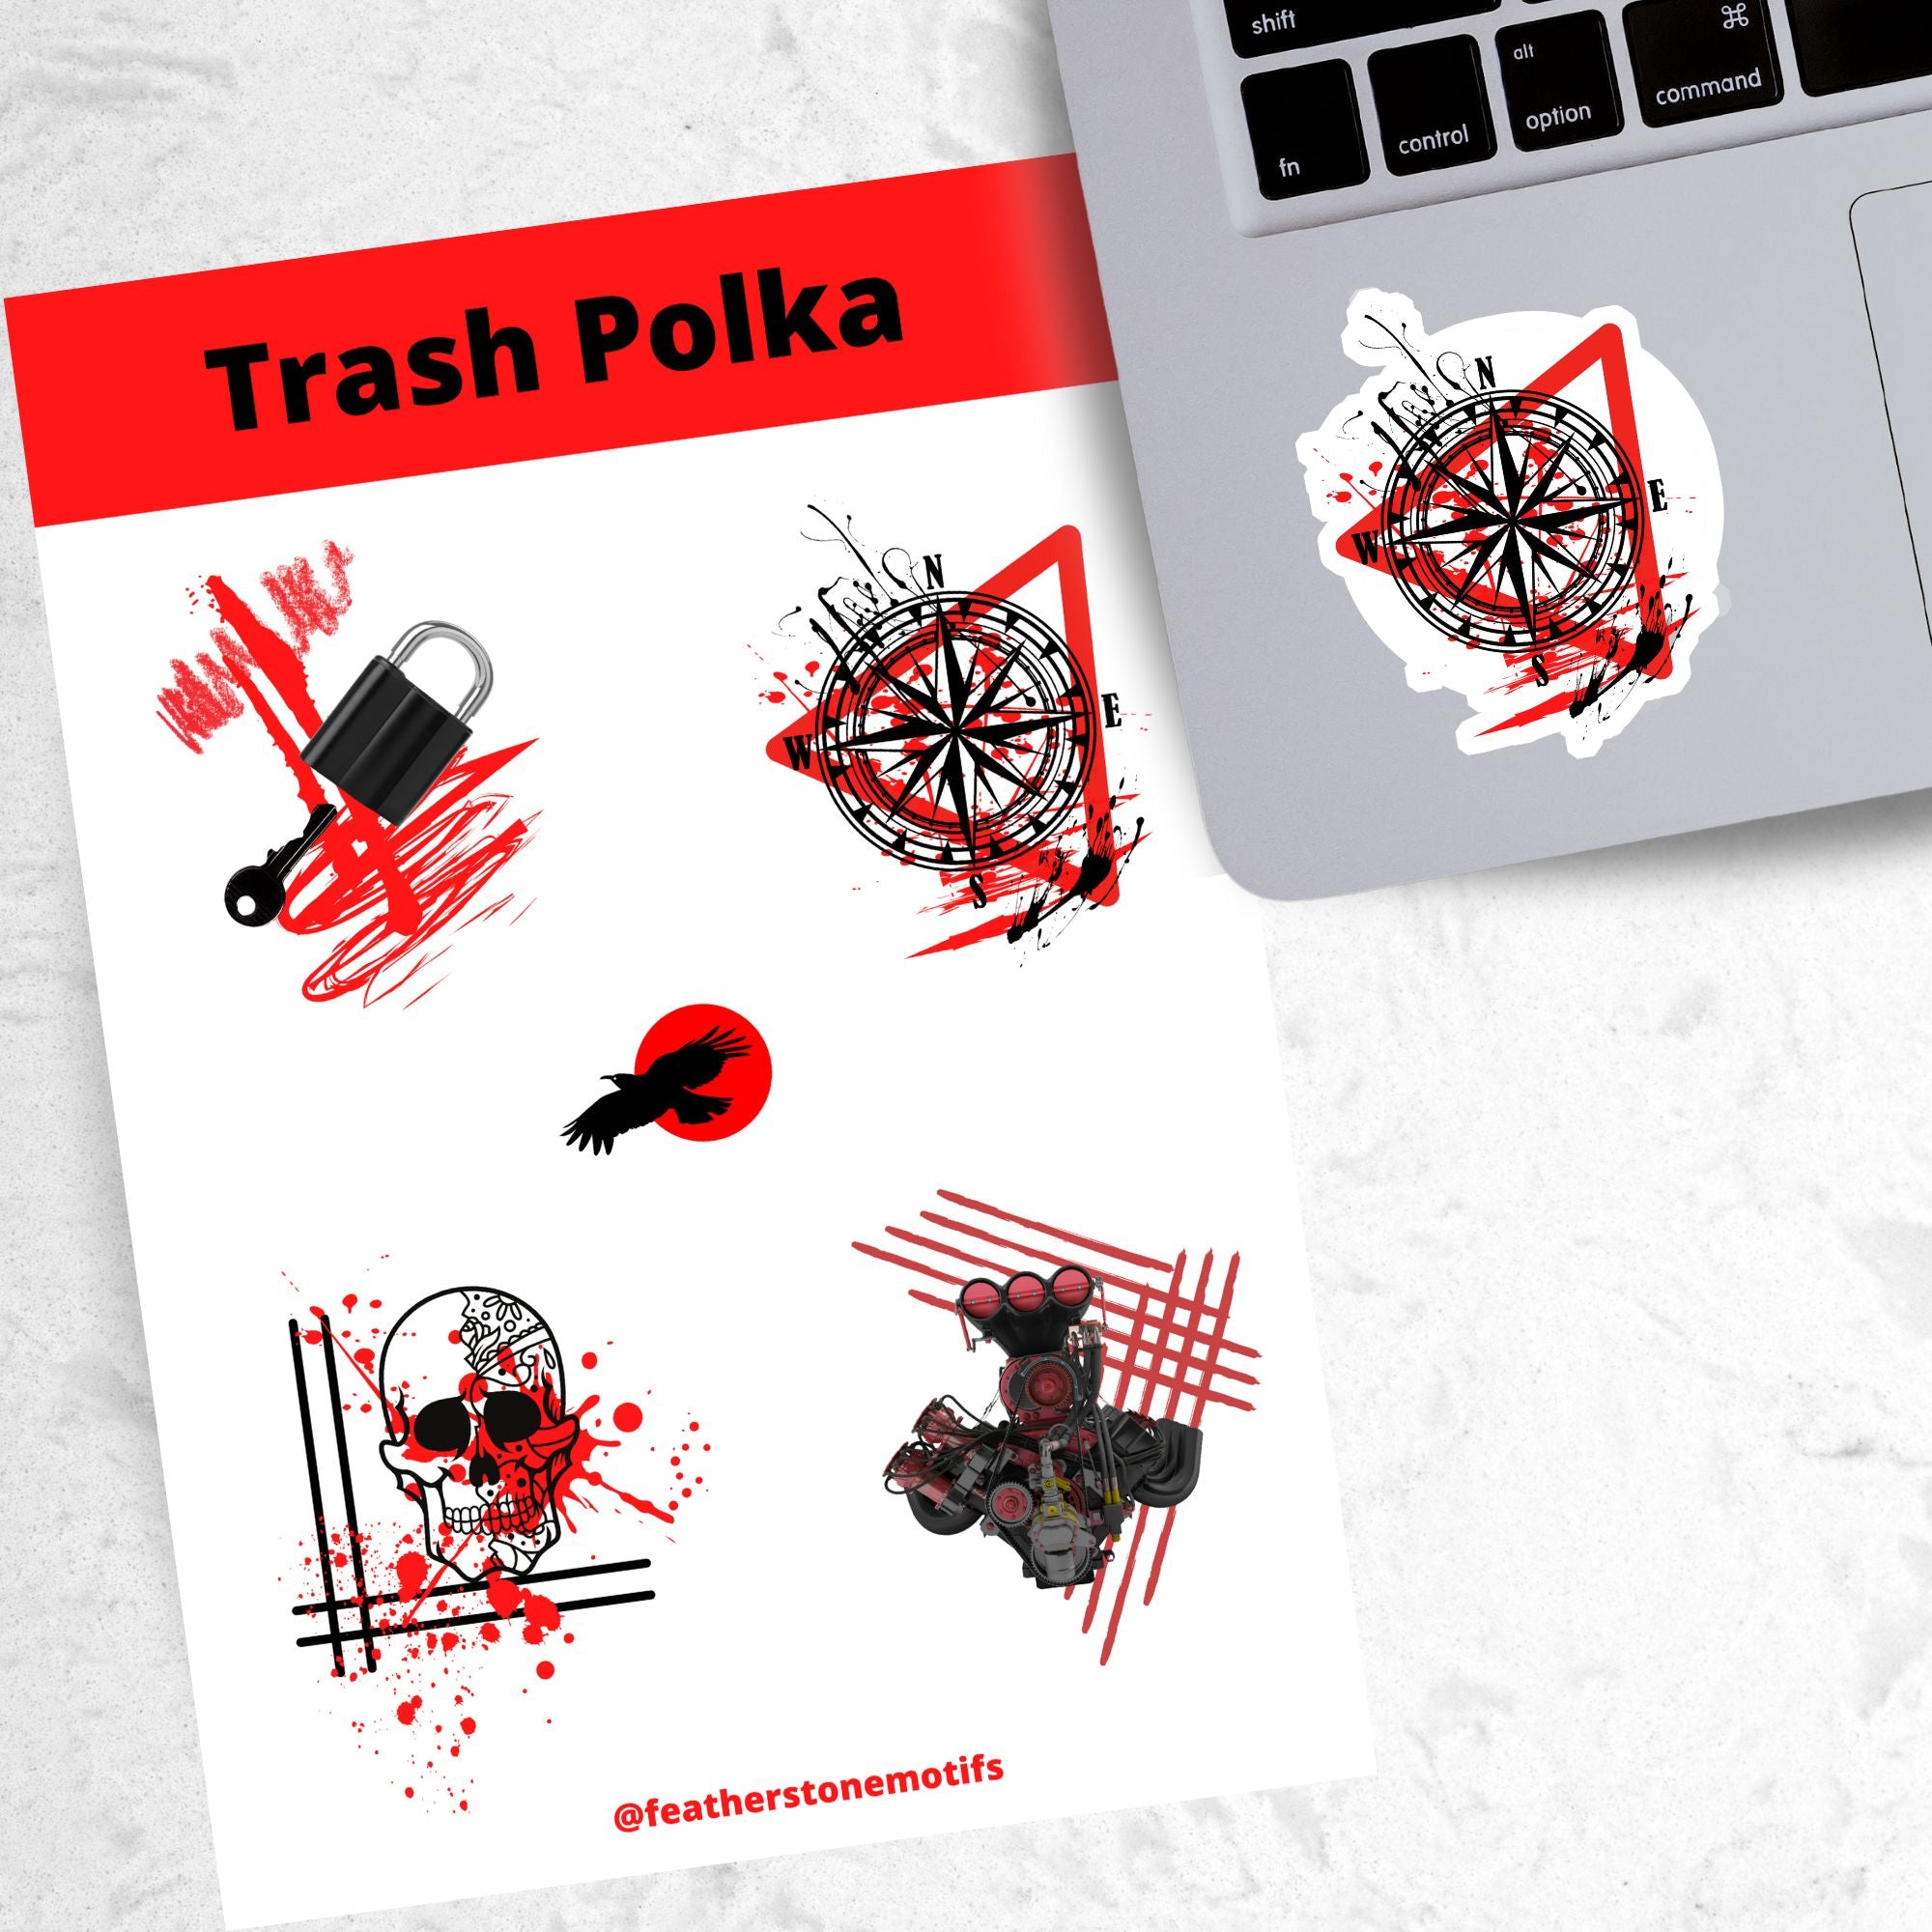 Trash Polka uses red, black, and white with a combination of abstract, surrealistic, and realistic images. This sticker sheet has four larger stickers from our die-cut sticker collection combined with a smaller sticker of a raven flying across a red sun. The stickers are the Trash Polka Lock and Key, Trash Polka Compass, Trash Polka Skull, and Trash Polka Engine. This image shows the sticker sheet next to an open laptop with the Trash Polka Compass sticker applied below the keyboard.